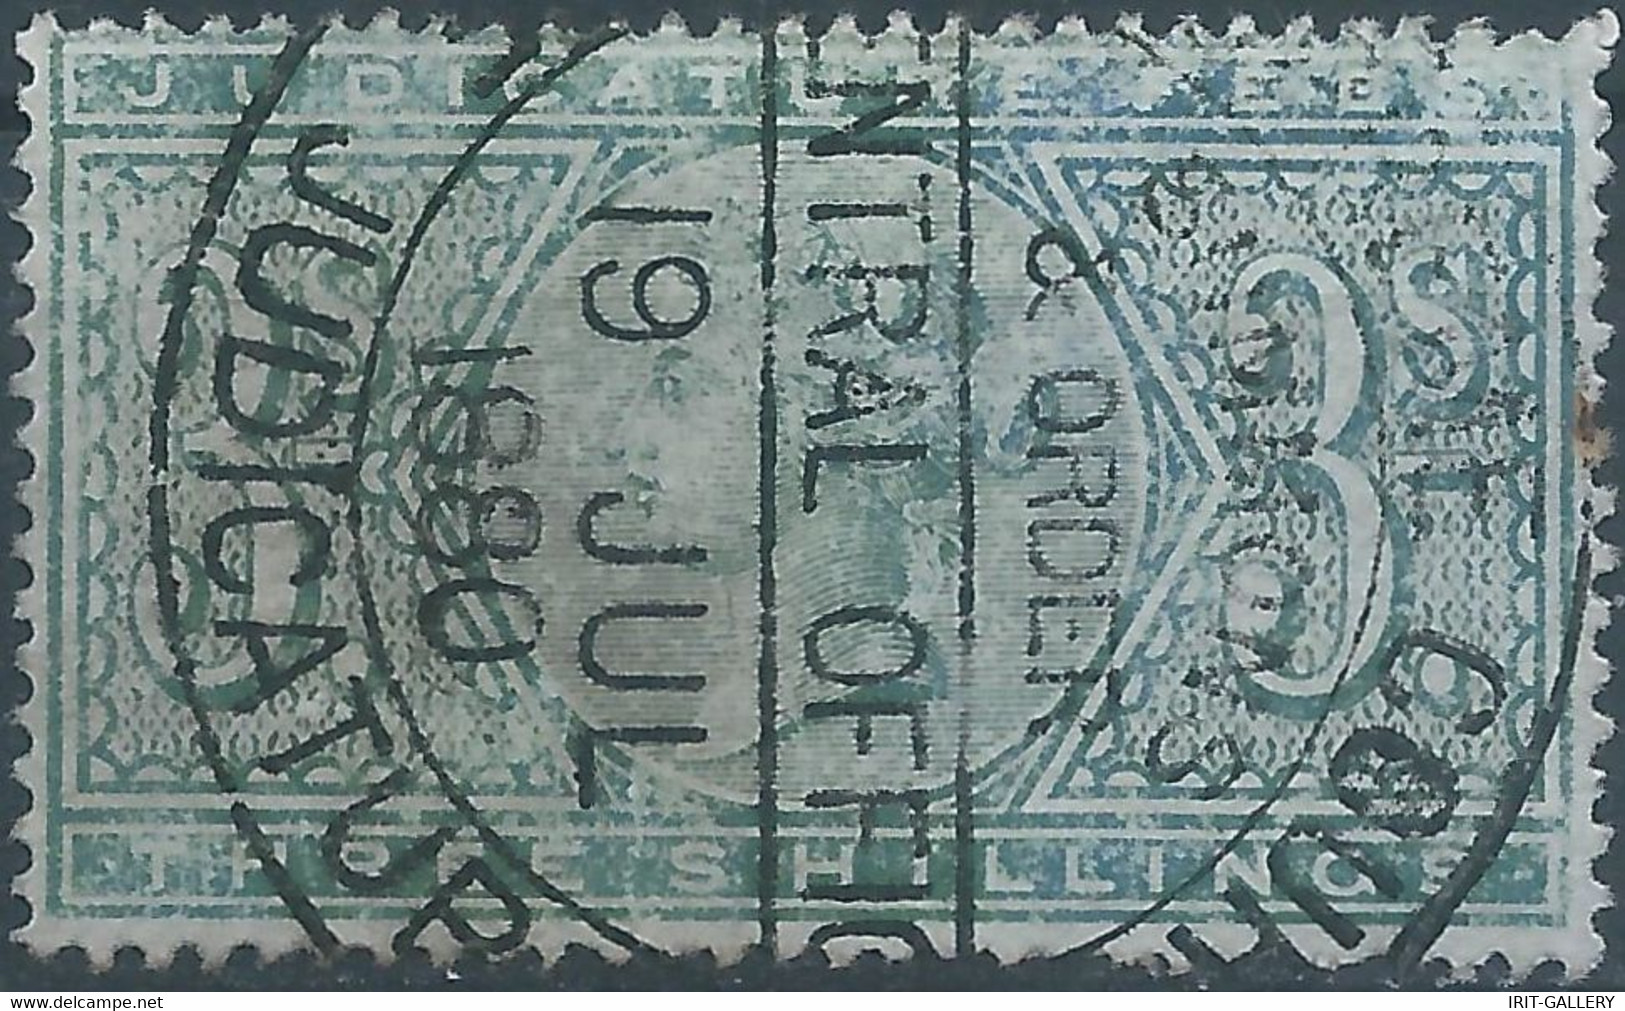 Great Britain-ENGLAND,Queen Victoria,1880 Revenue Stamp Tax Fiscal,JUDICATURE FEES, 3 Shillings,Used - Steuermarken